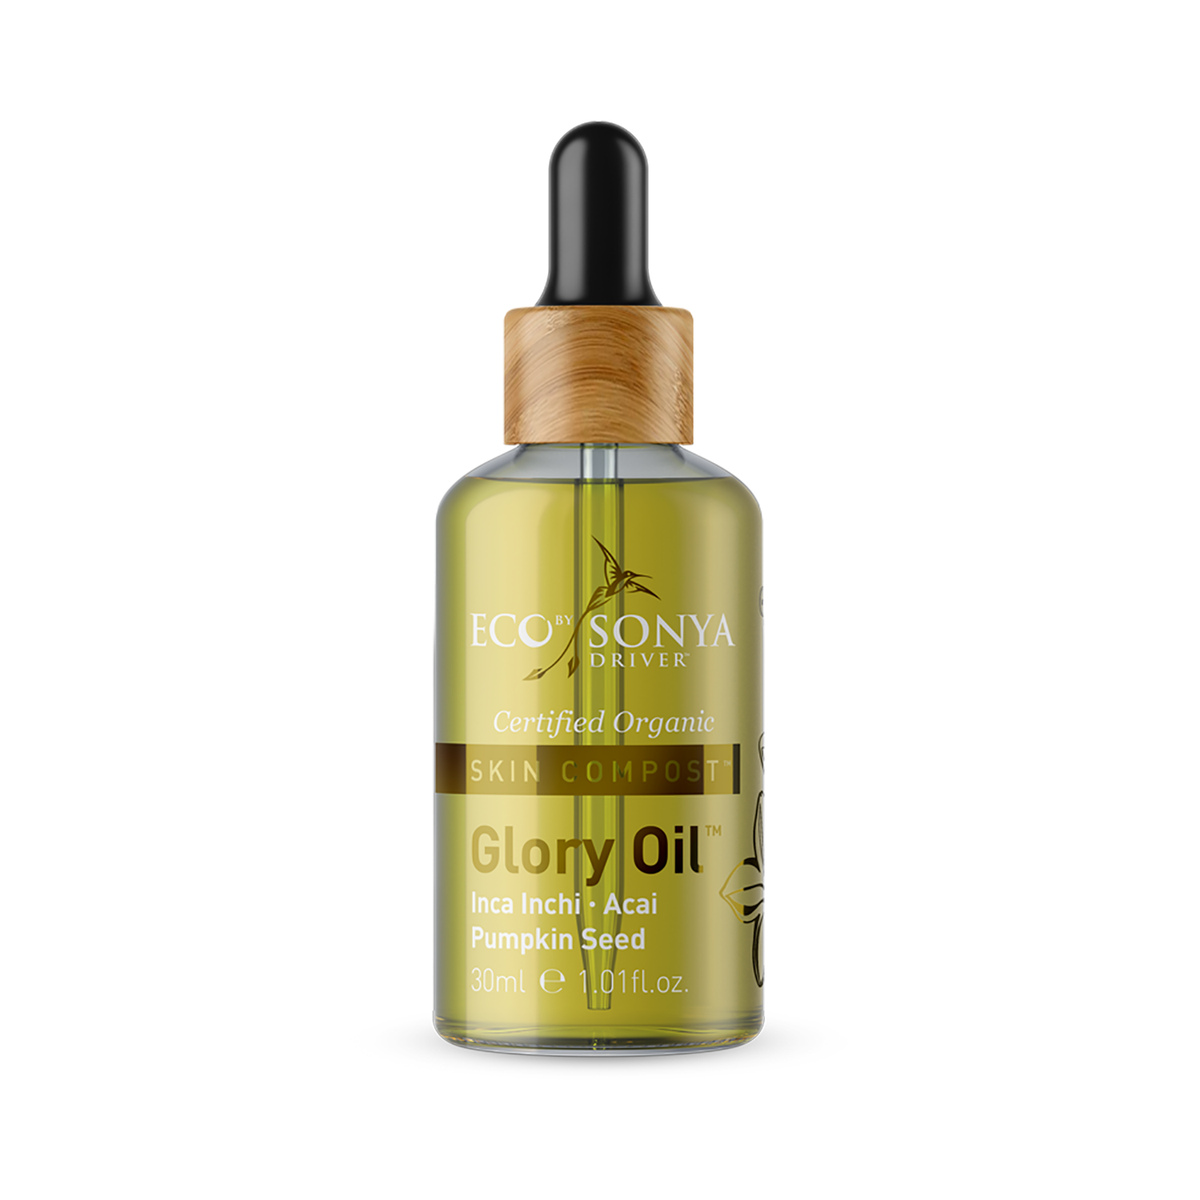 Eco by Sonya - Glory Oil™ Day &amp; Night face hydrator